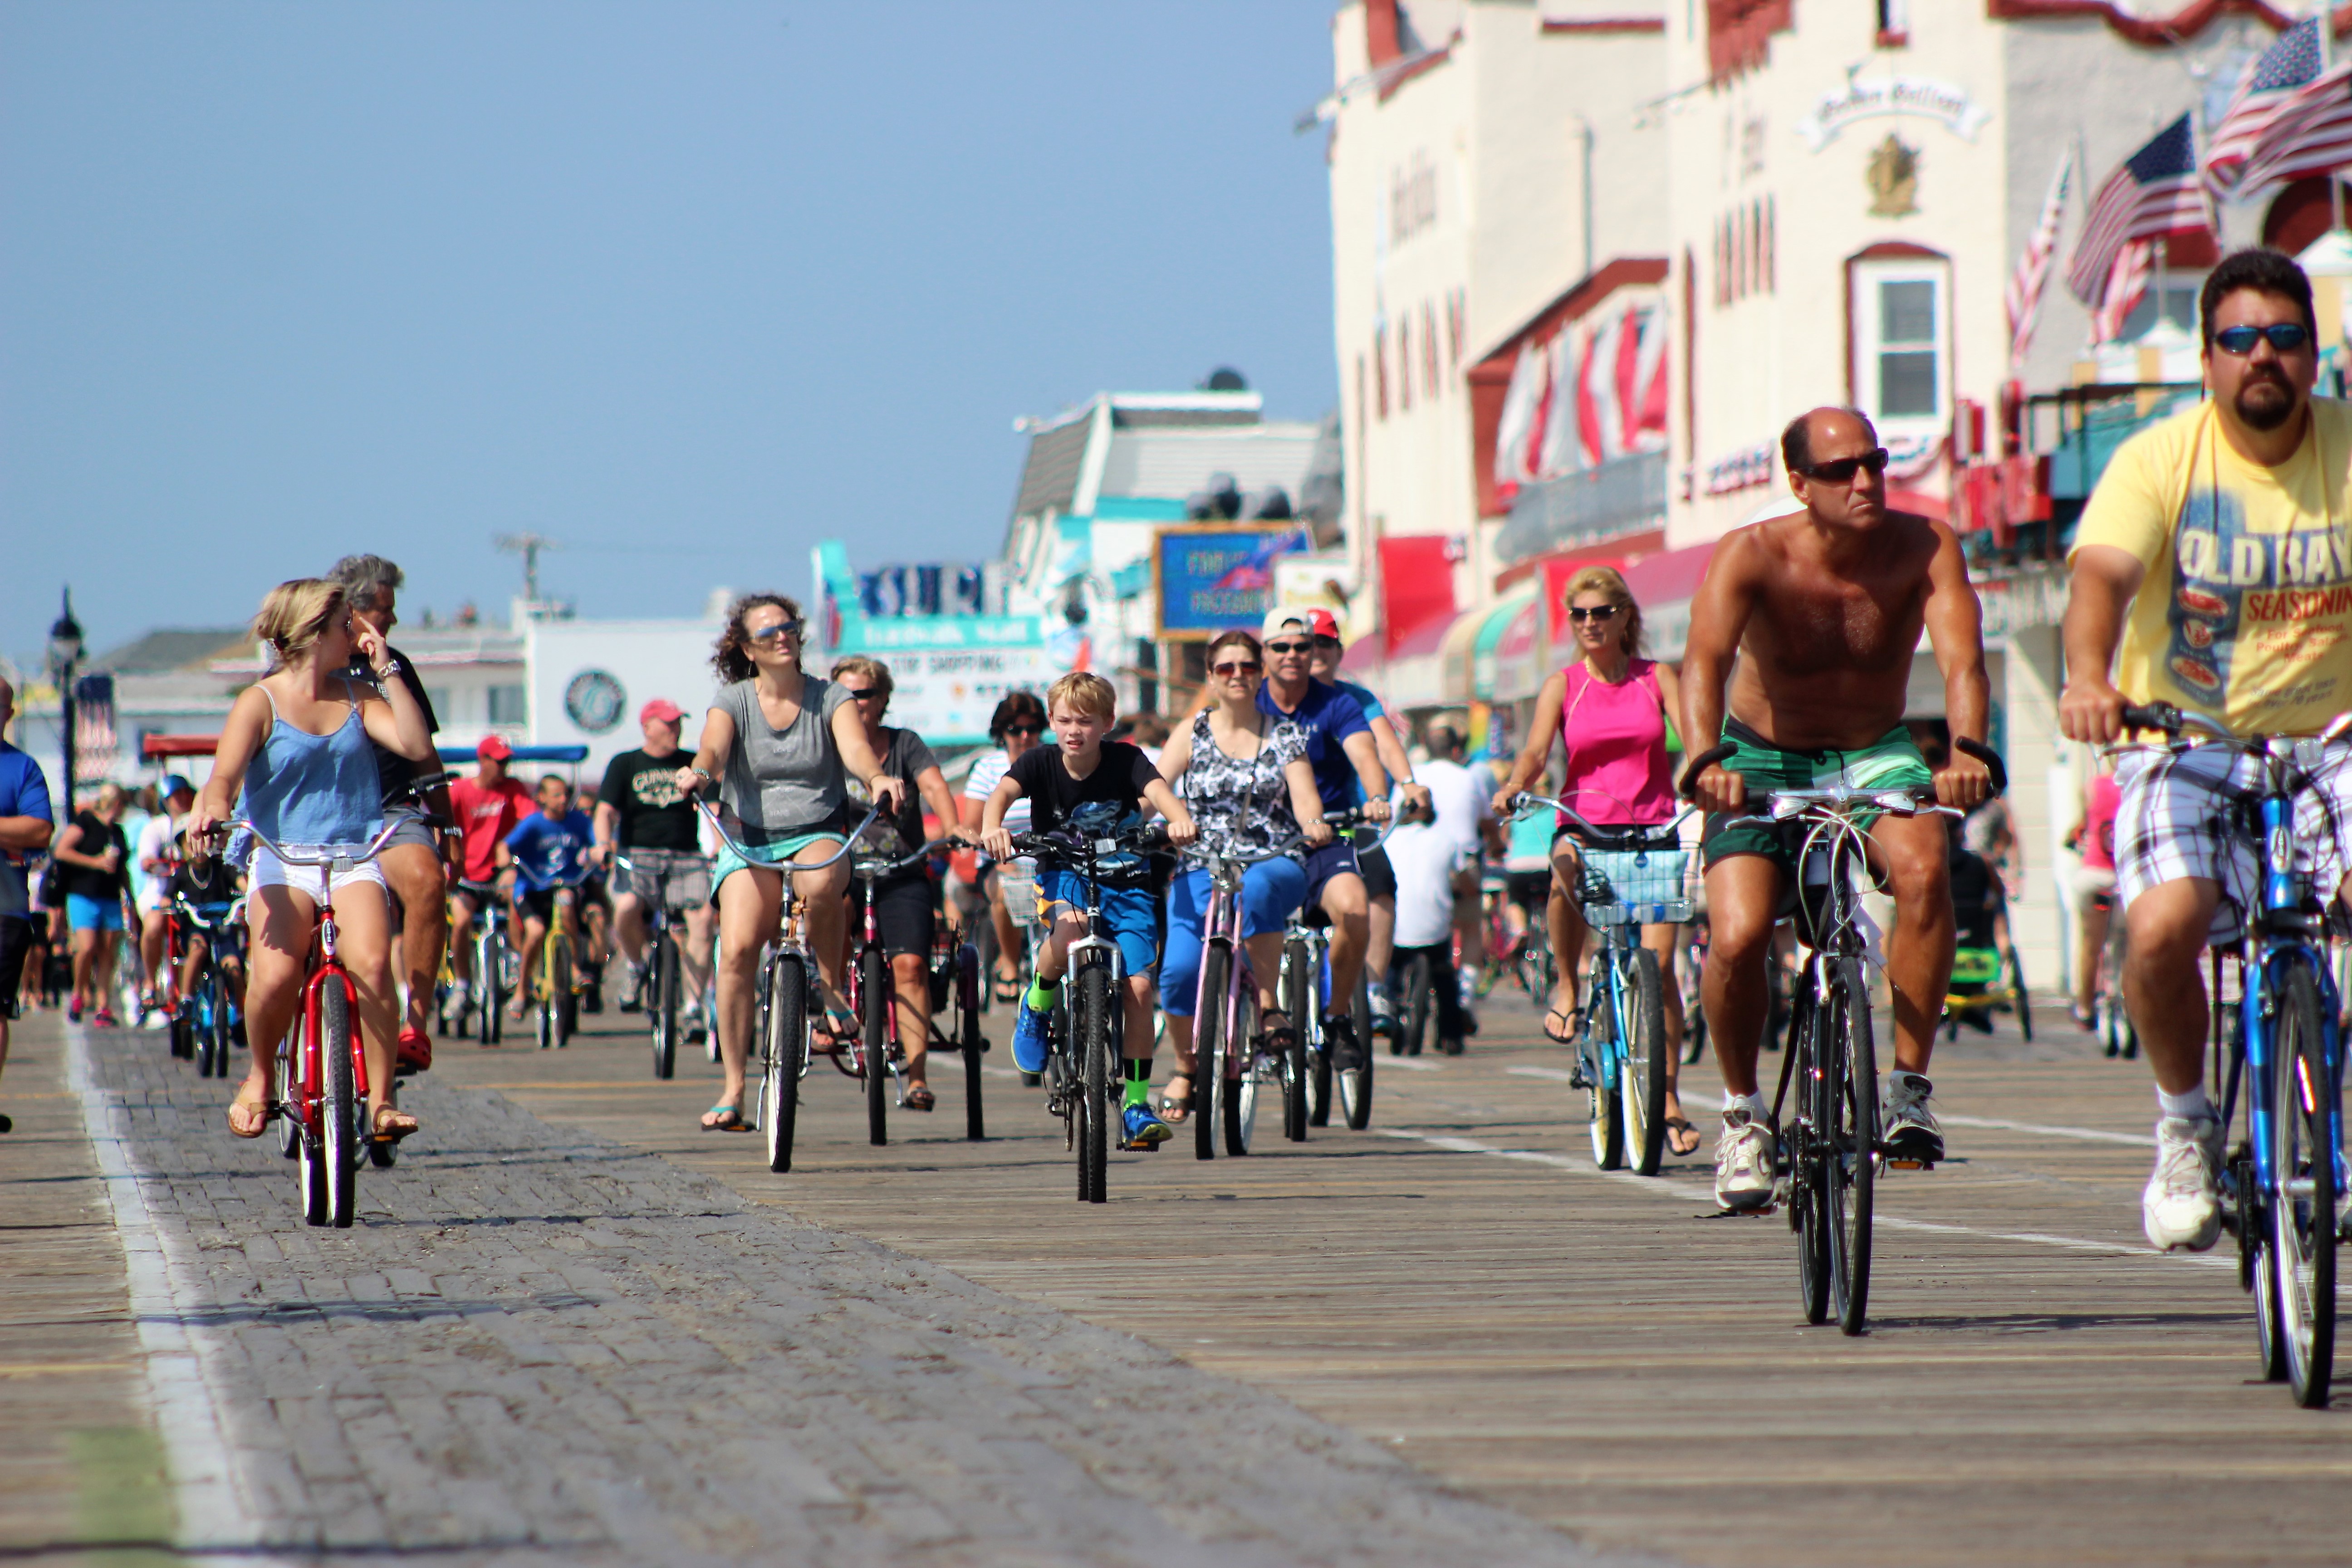 Bicycling has long been popular on Ocean City’s boardwalk. There is also a bike lane along Haven Avenue